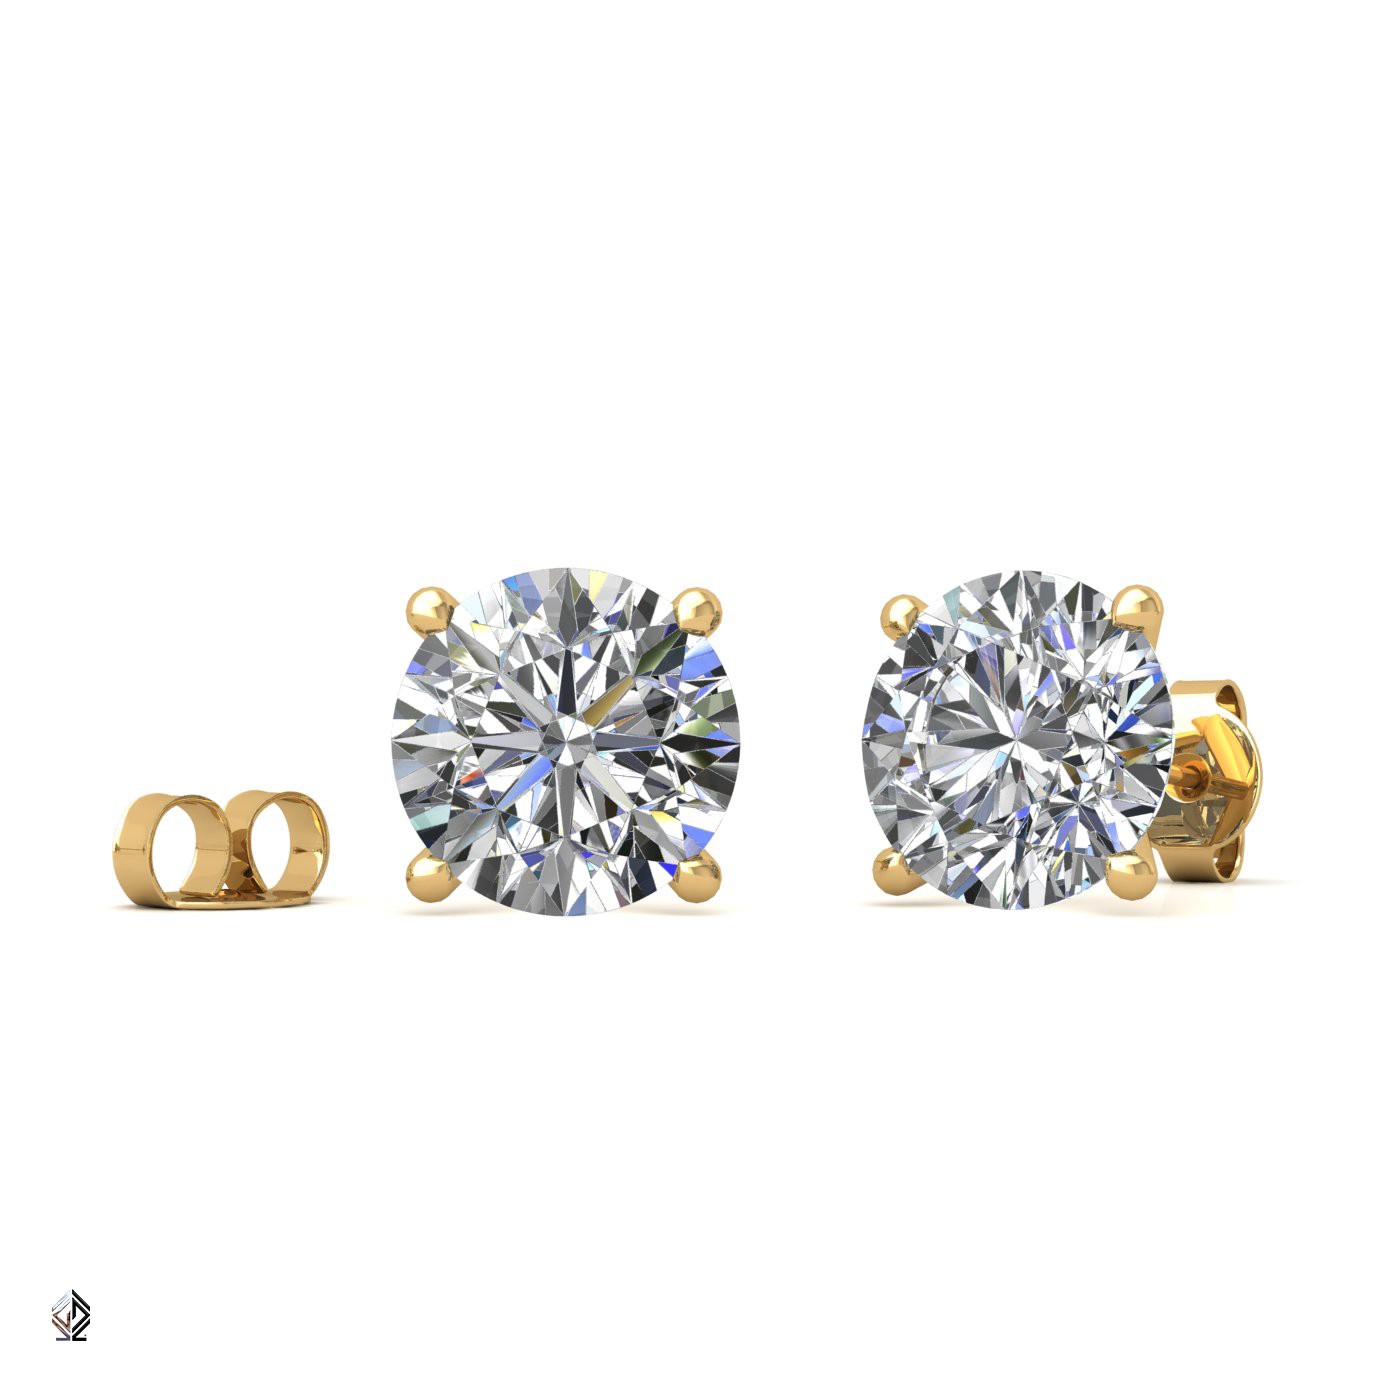 18k yellow gold 0,5 ct each (1,0 tcw) 4 prongs round cut classic diamond earring studs Photos & images